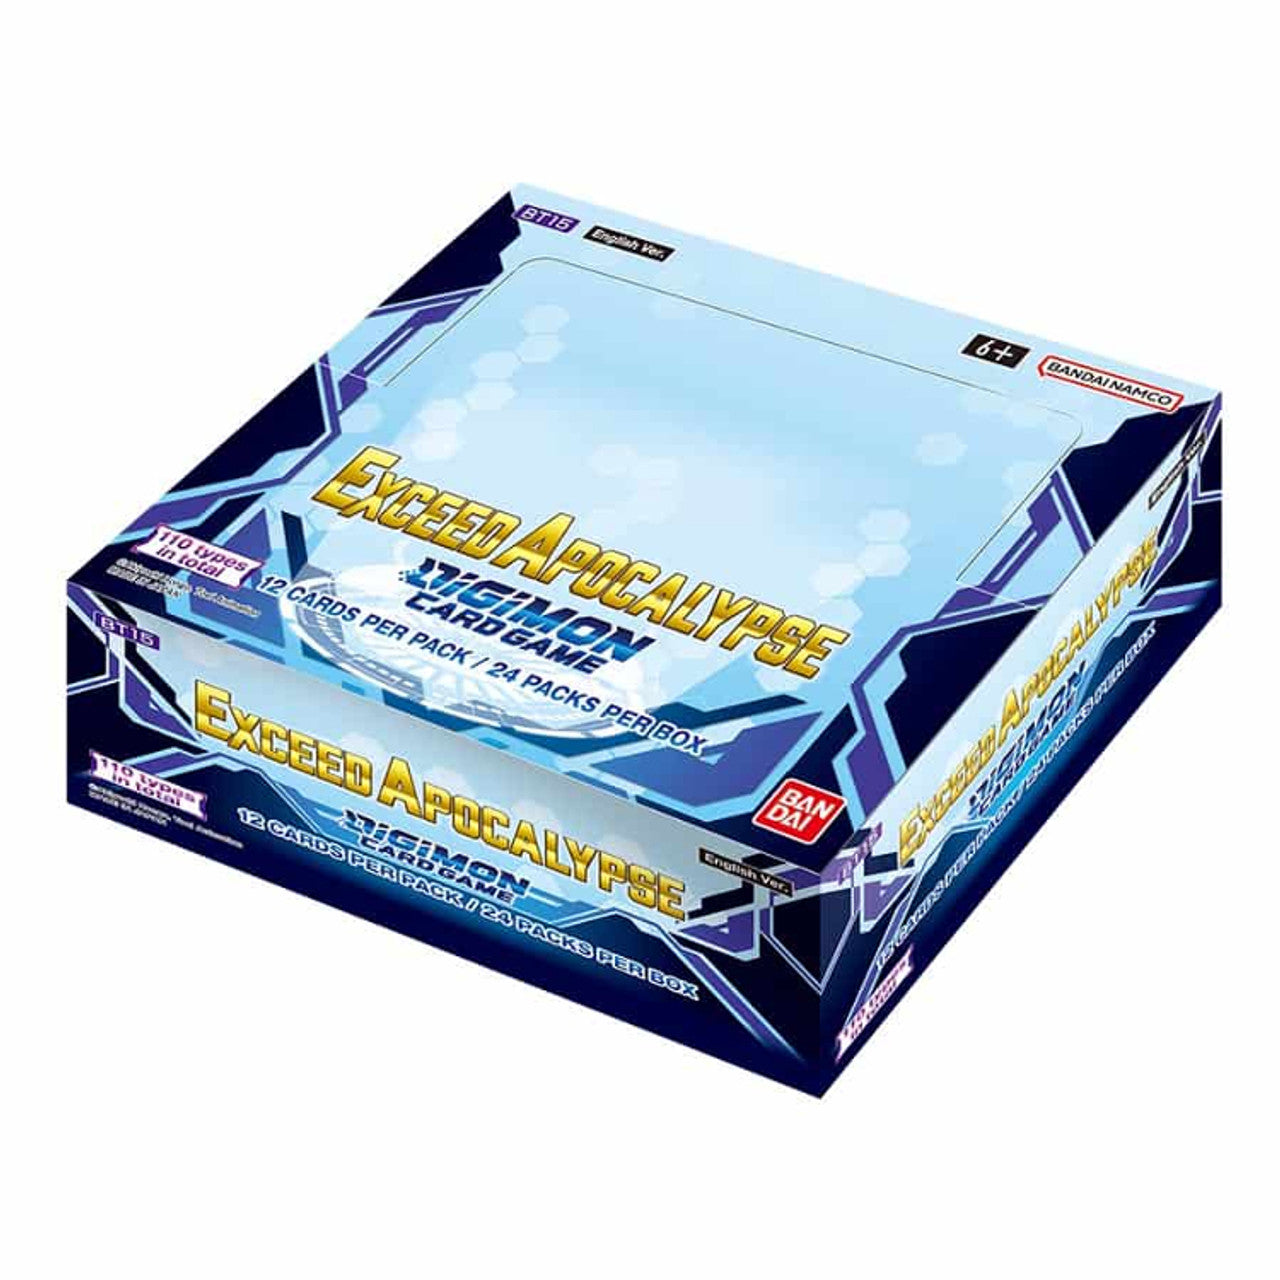 Digimon TCG: Exceed Apocalypse - Booster Box [BT15]